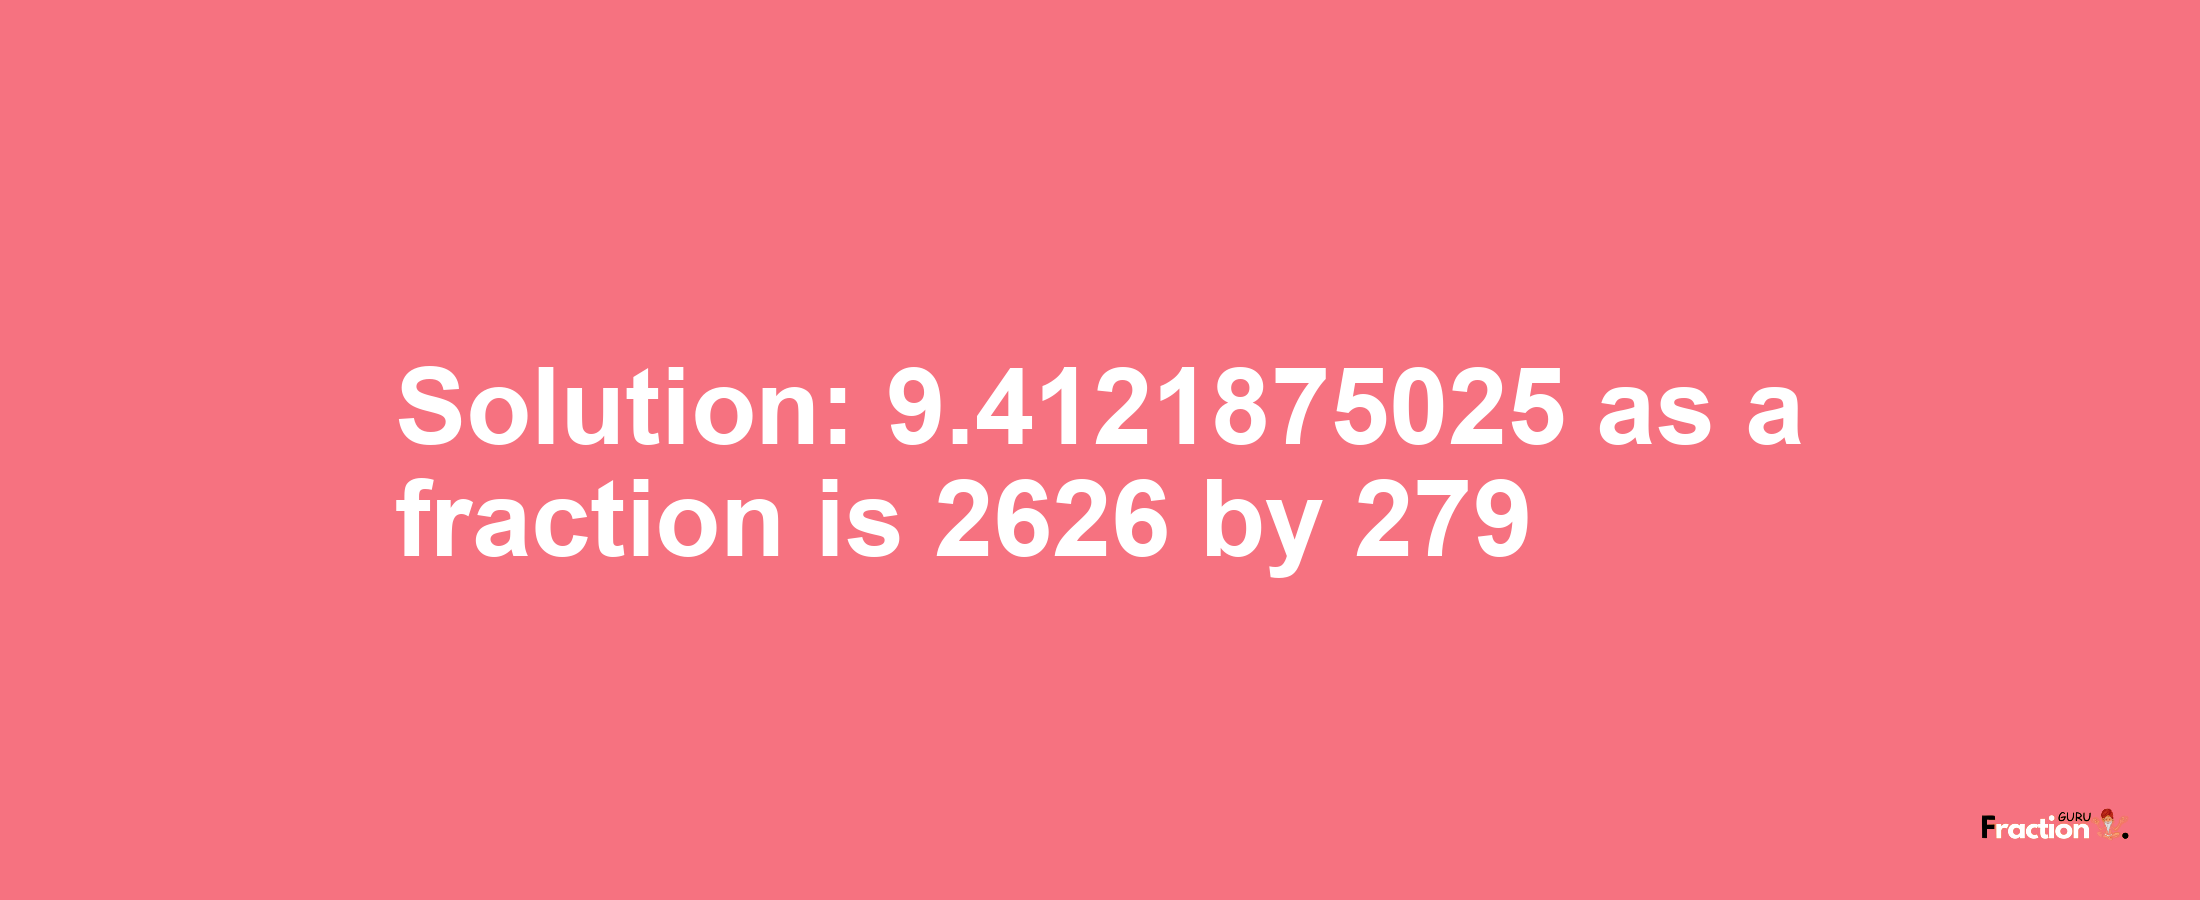 Solution:9.4121875025 as a fraction is 2626/279